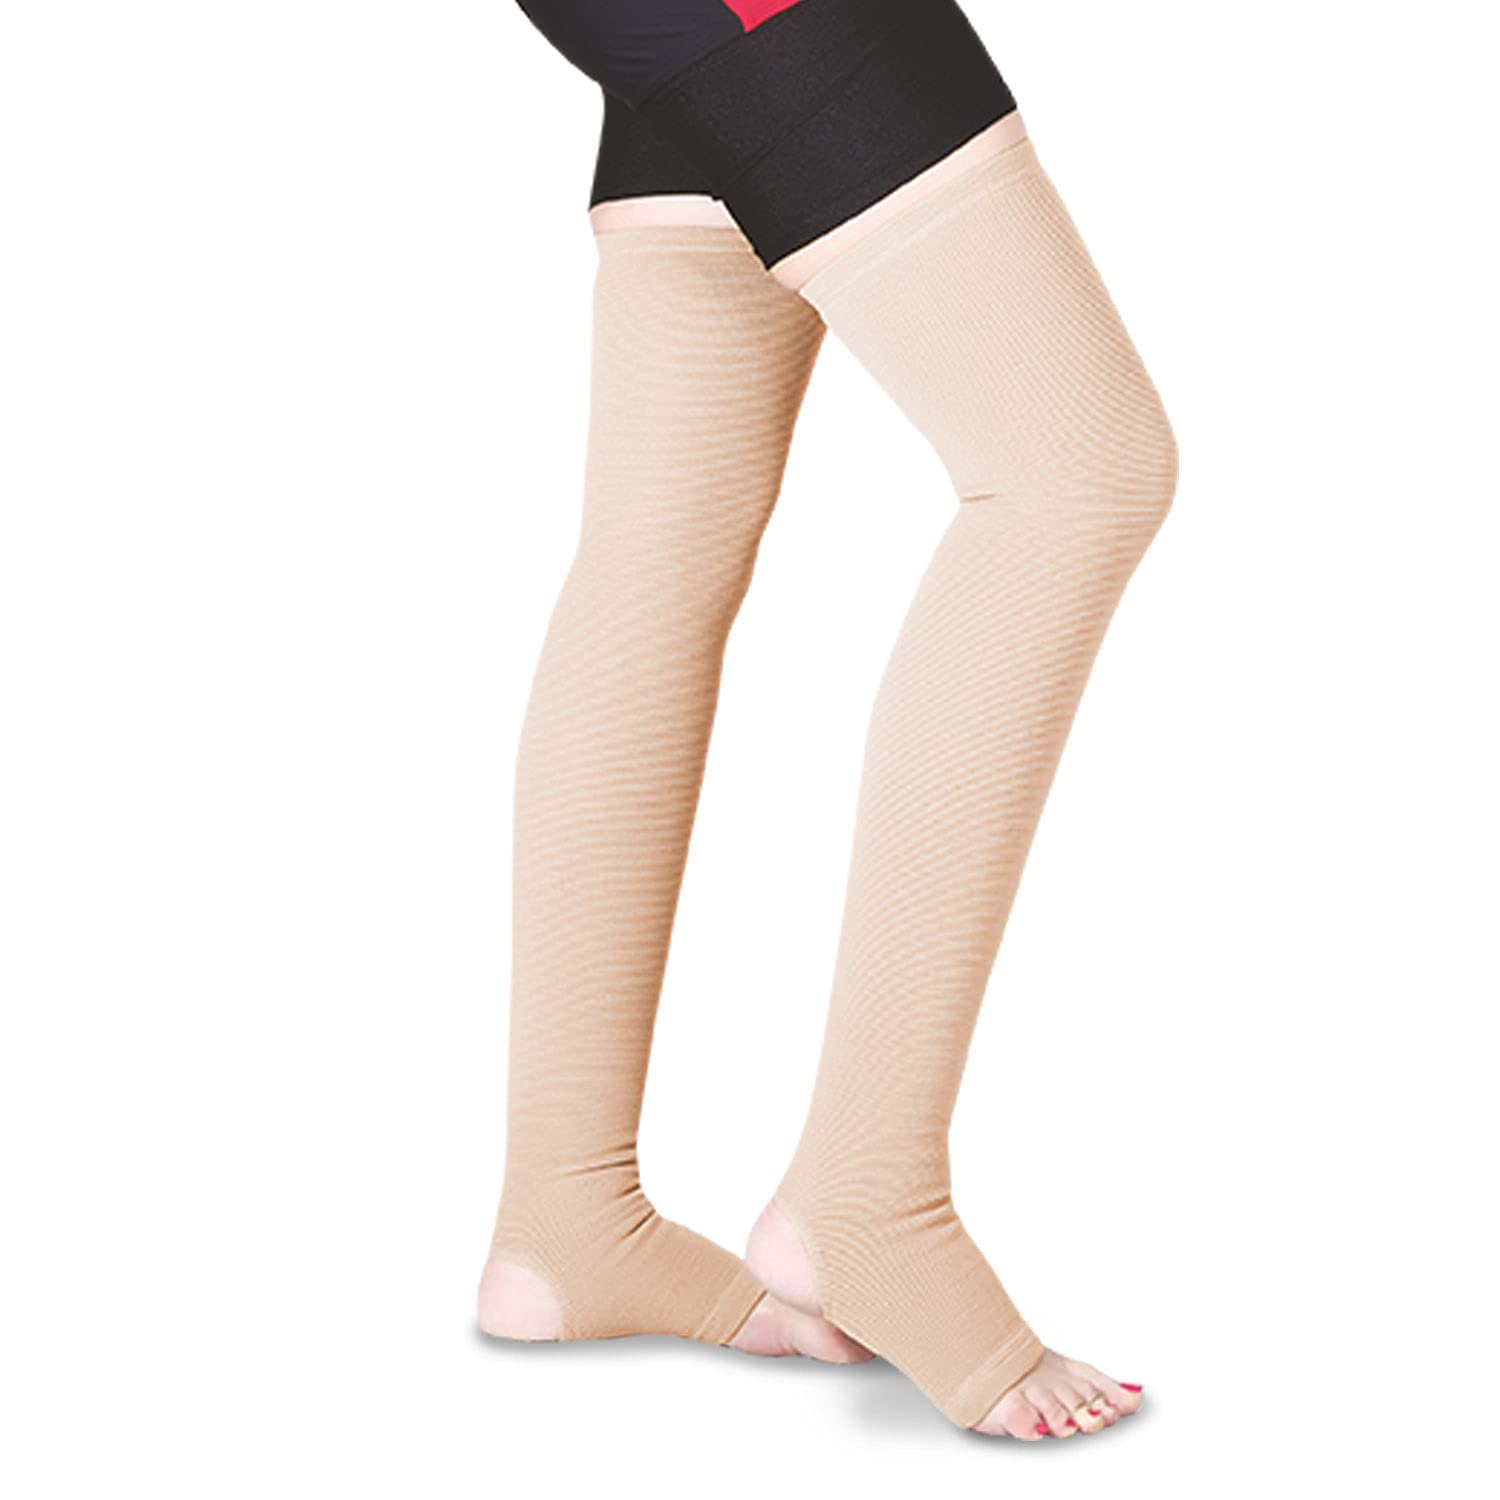 Flamingo Vericose Vein Stockings Medical Compression for Women